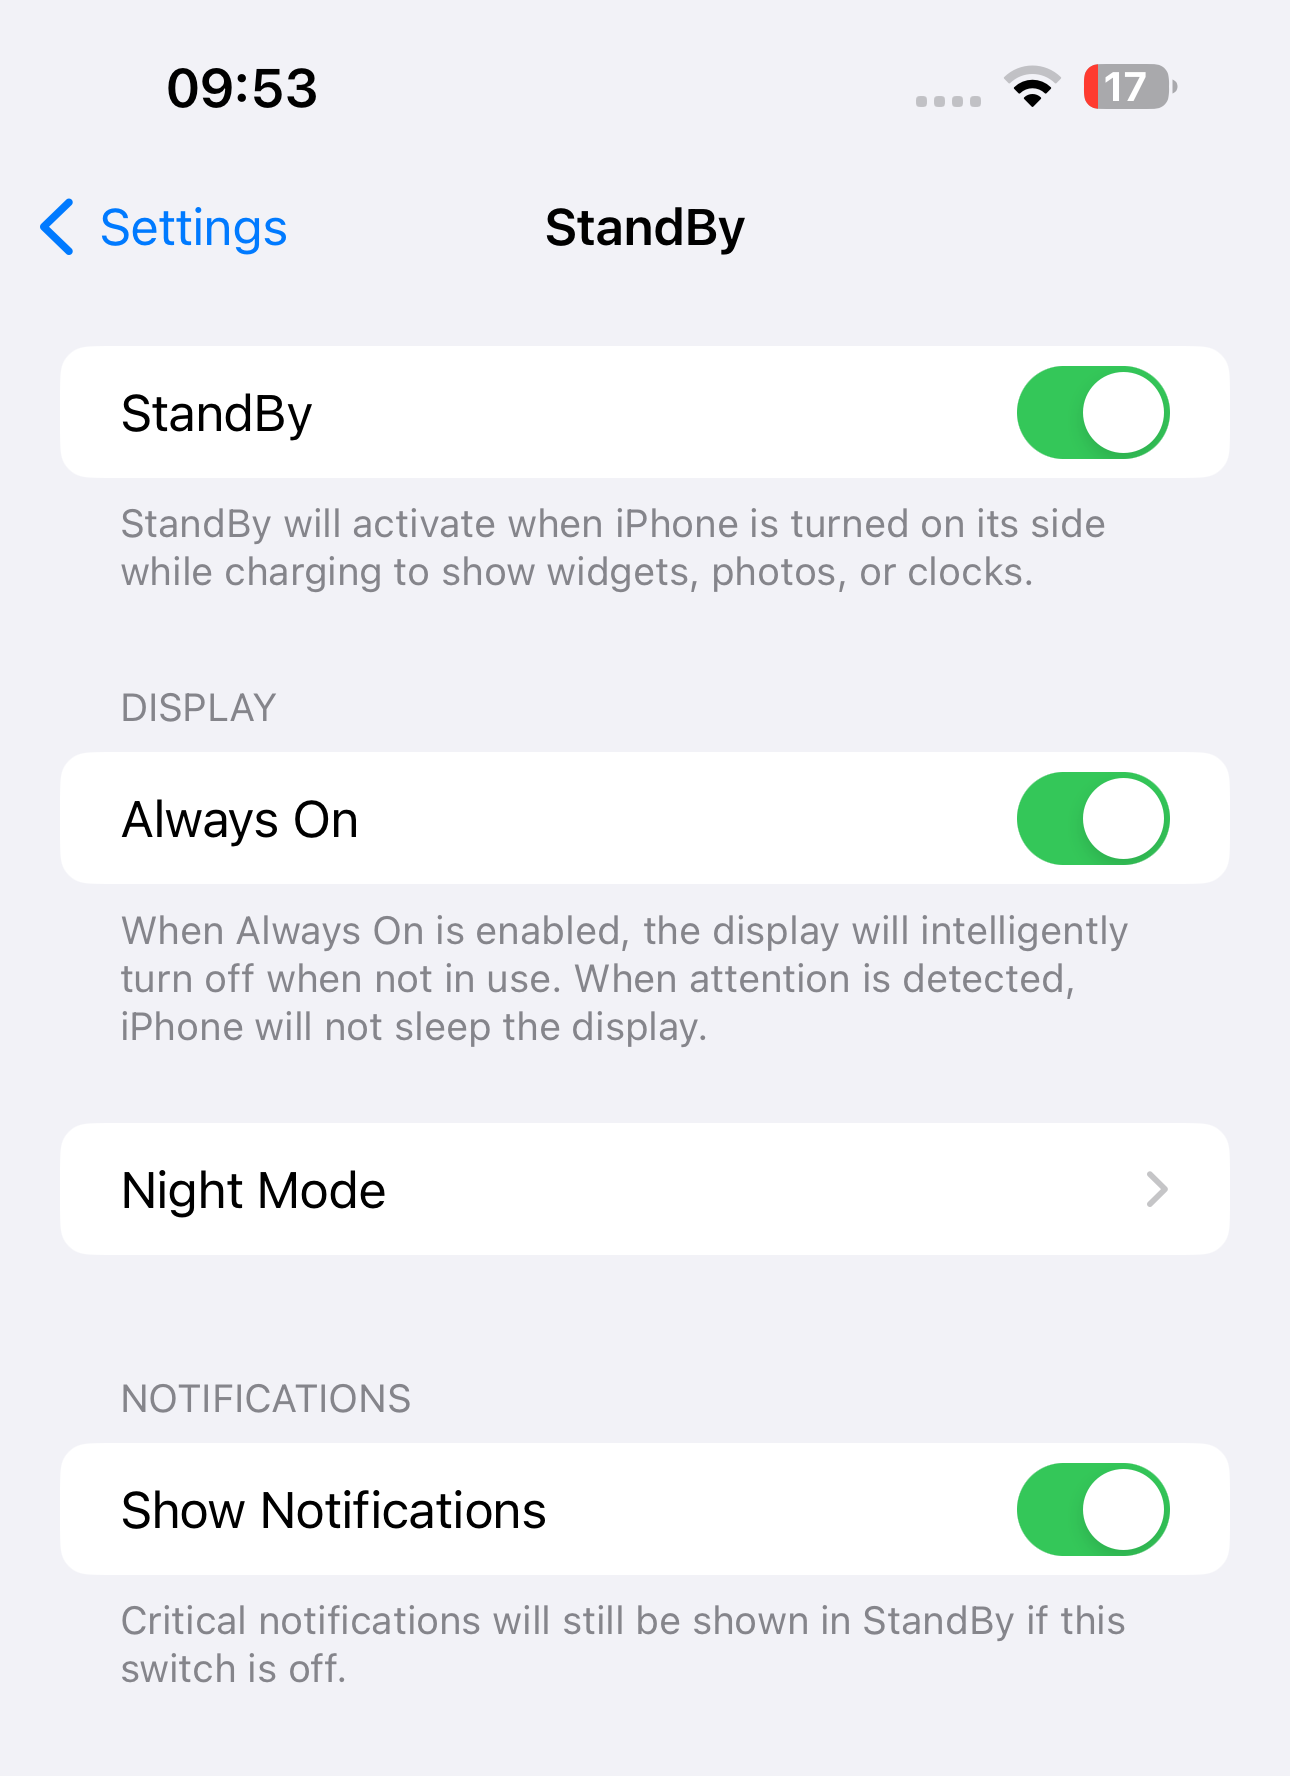 The Only Brand New Feature on iOS 17? Here Is How to Trigger the StandBy Mode on Your iPhone-Chargerlab